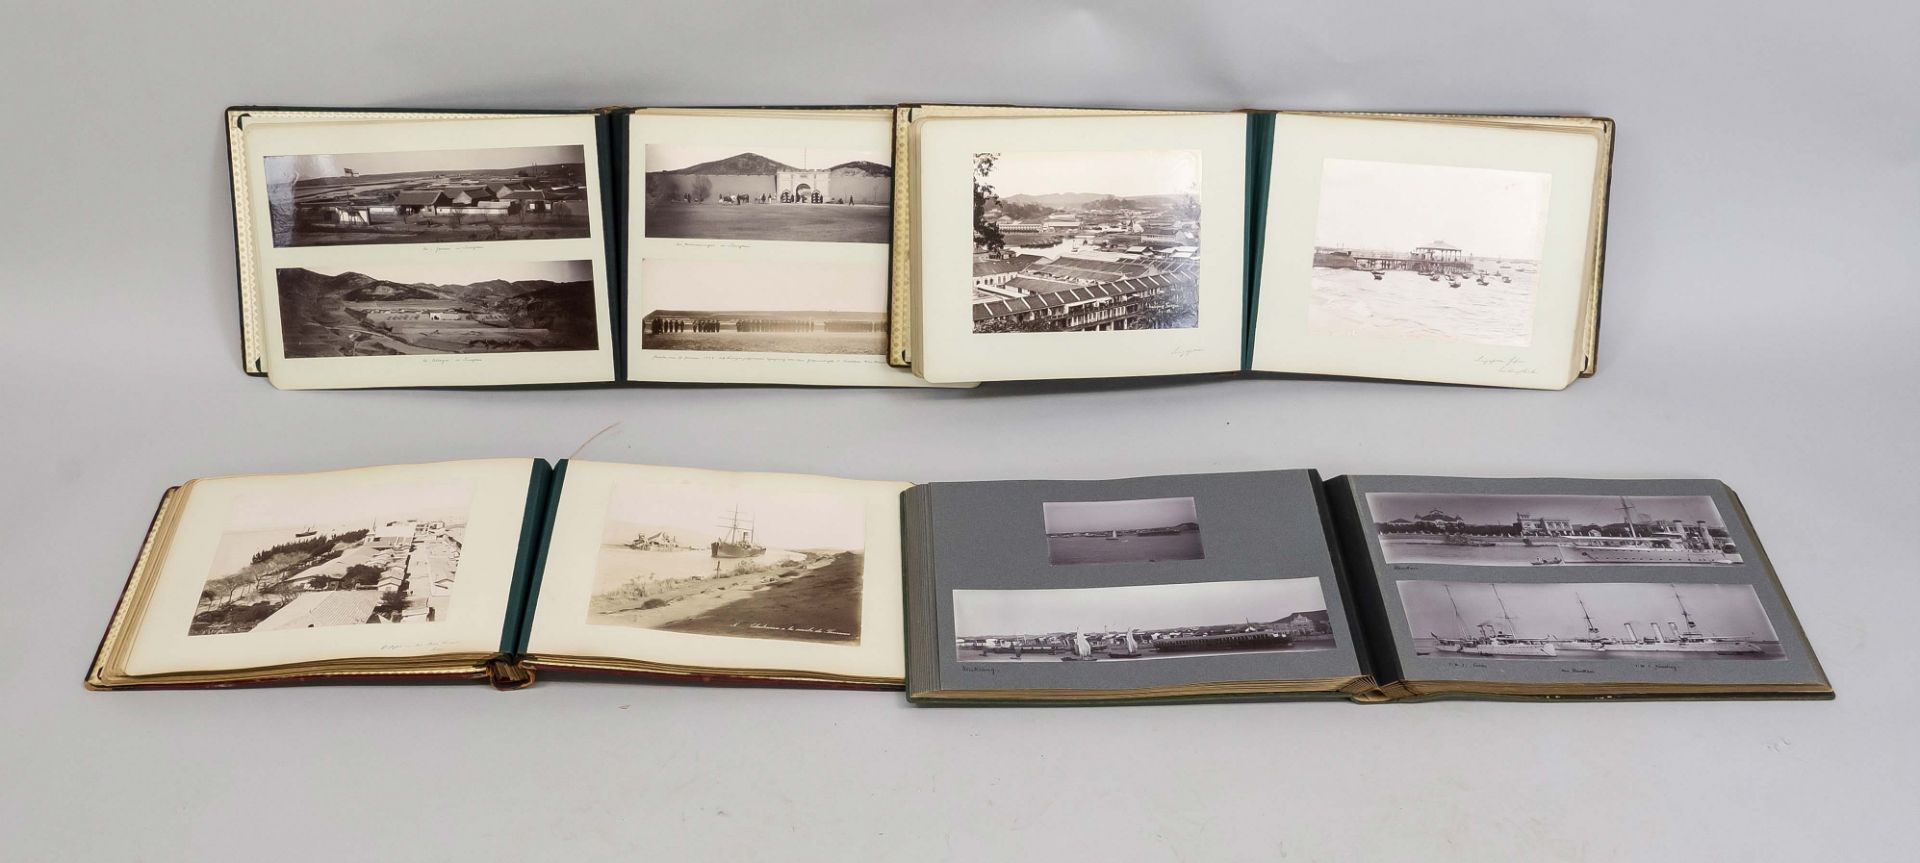 4 large photo albums Asia, around 1910. Very extensive collection of mainly private photos of a trip - Image 2 of 3